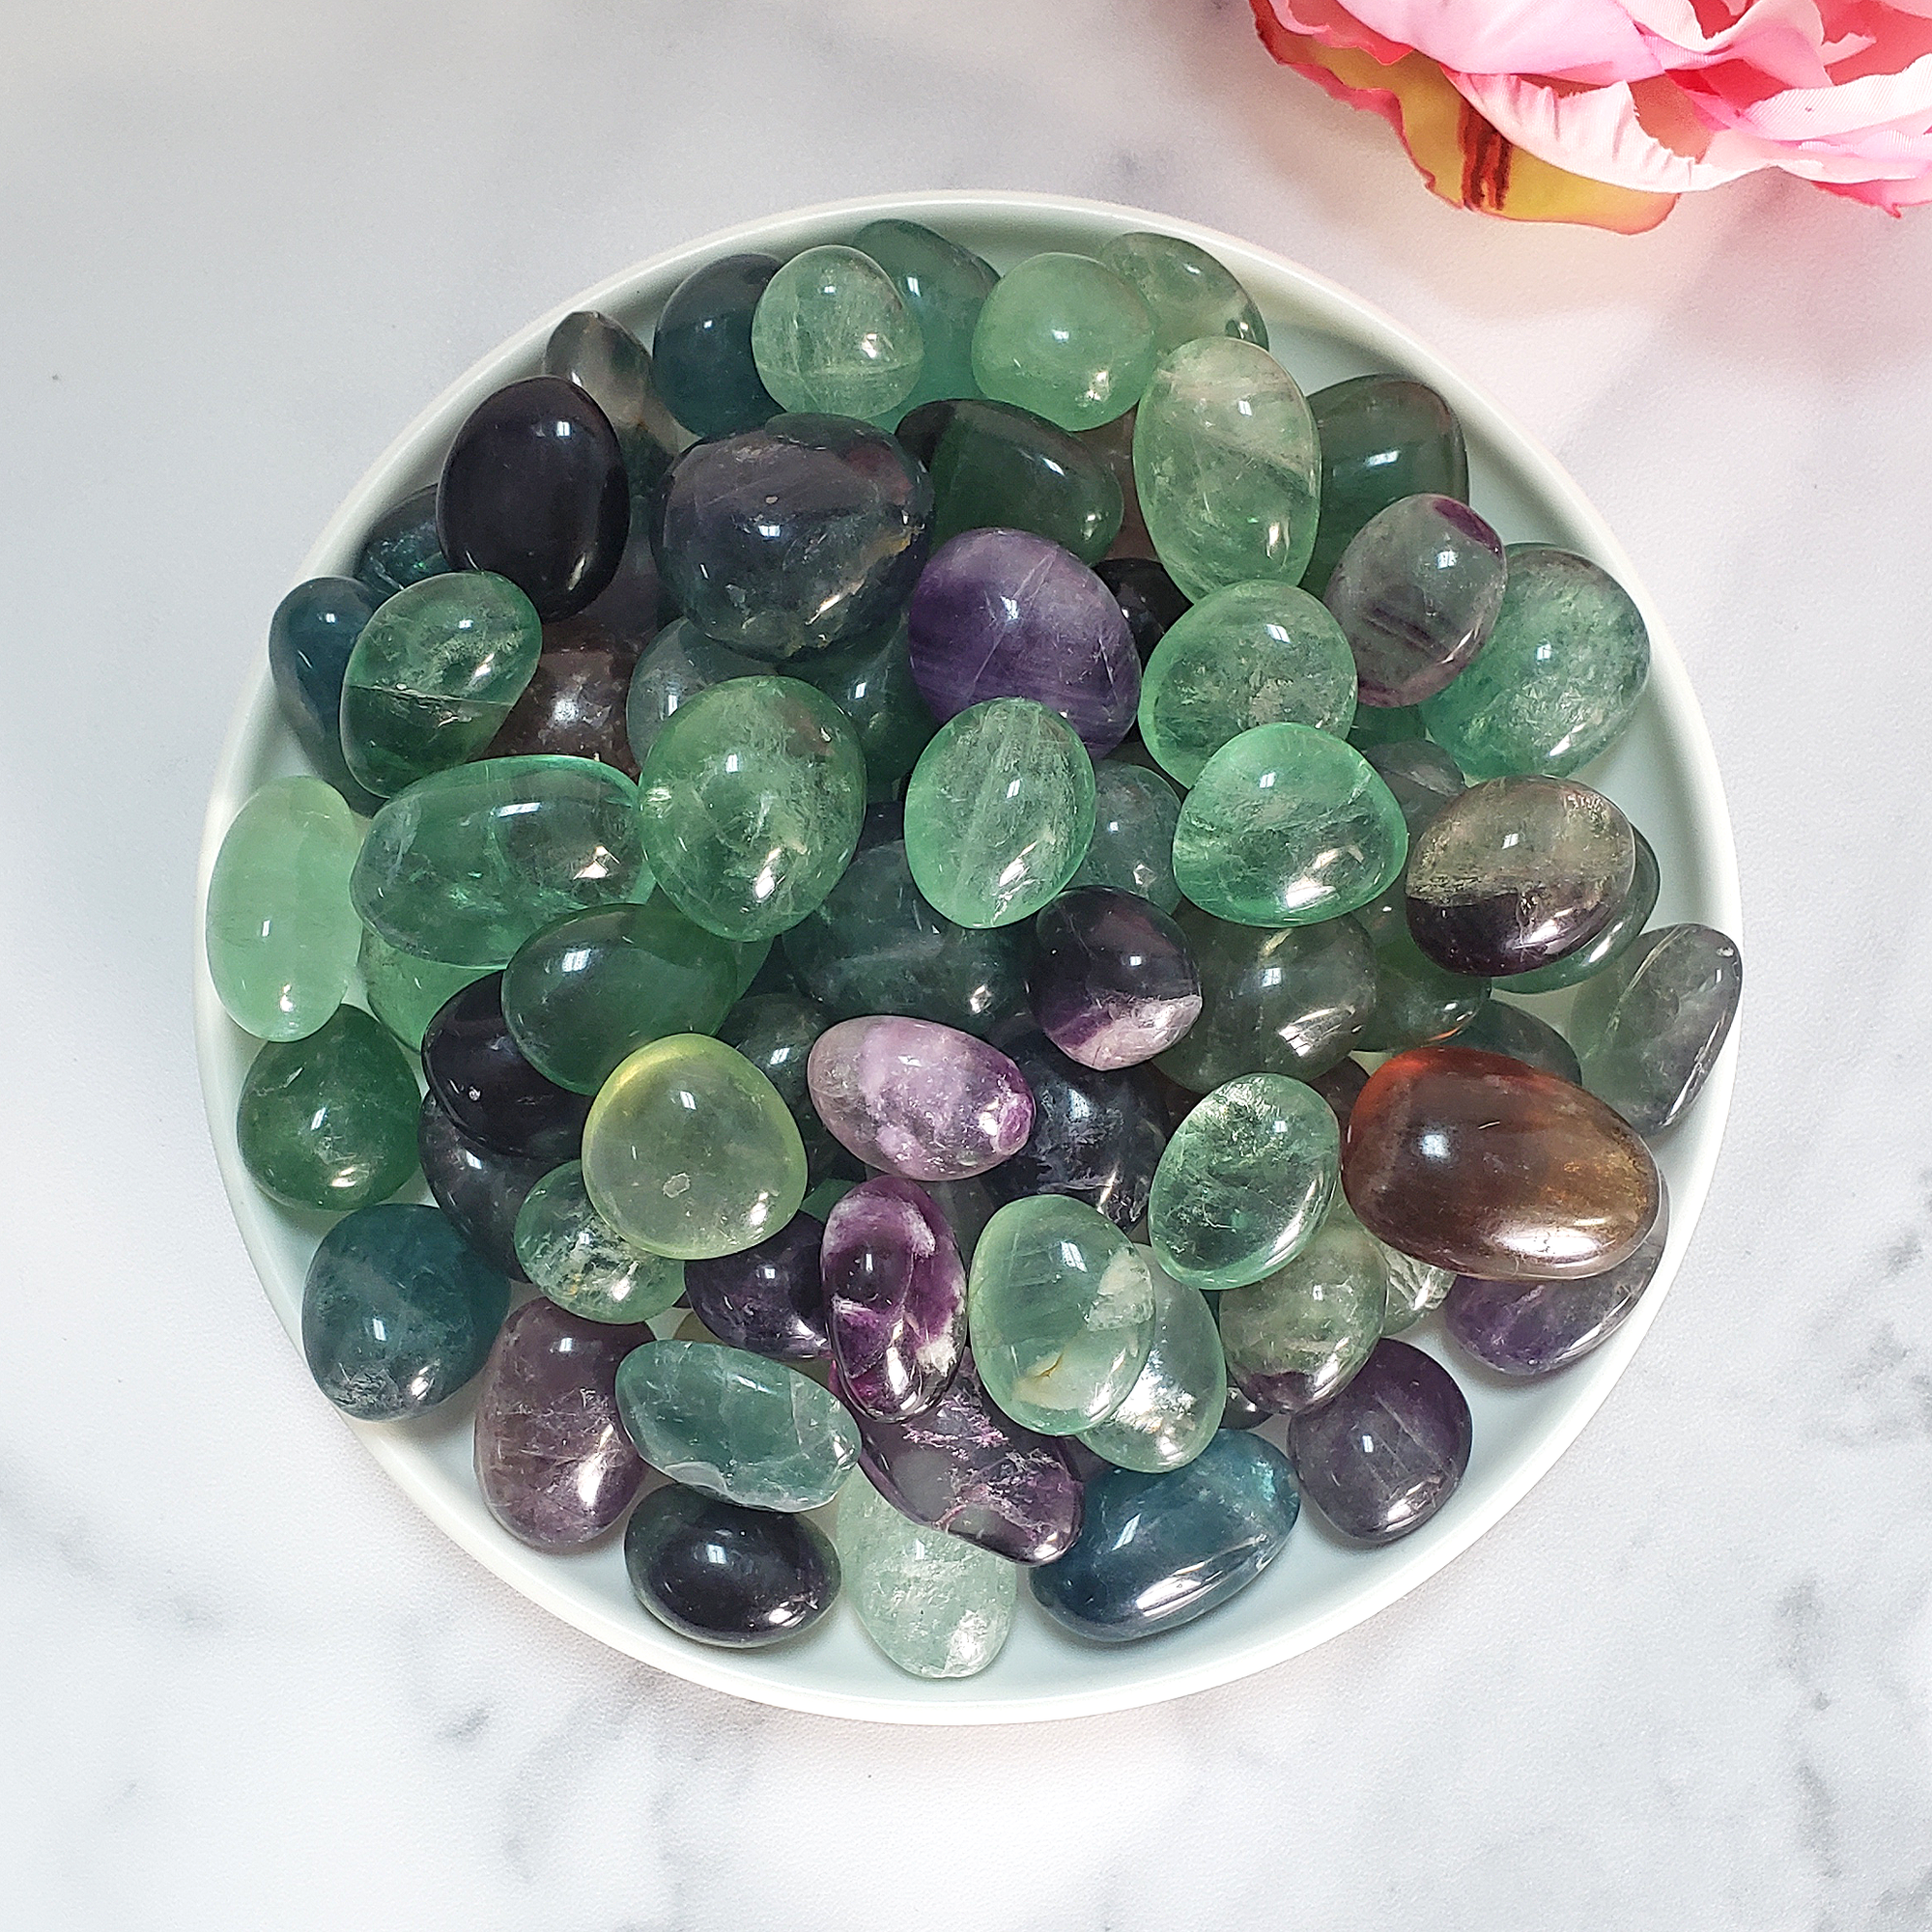 Fluorite Crystal Natural Gemstone Tumbled Stone | High Quality - AAA Grade Fluorite Polished Stones